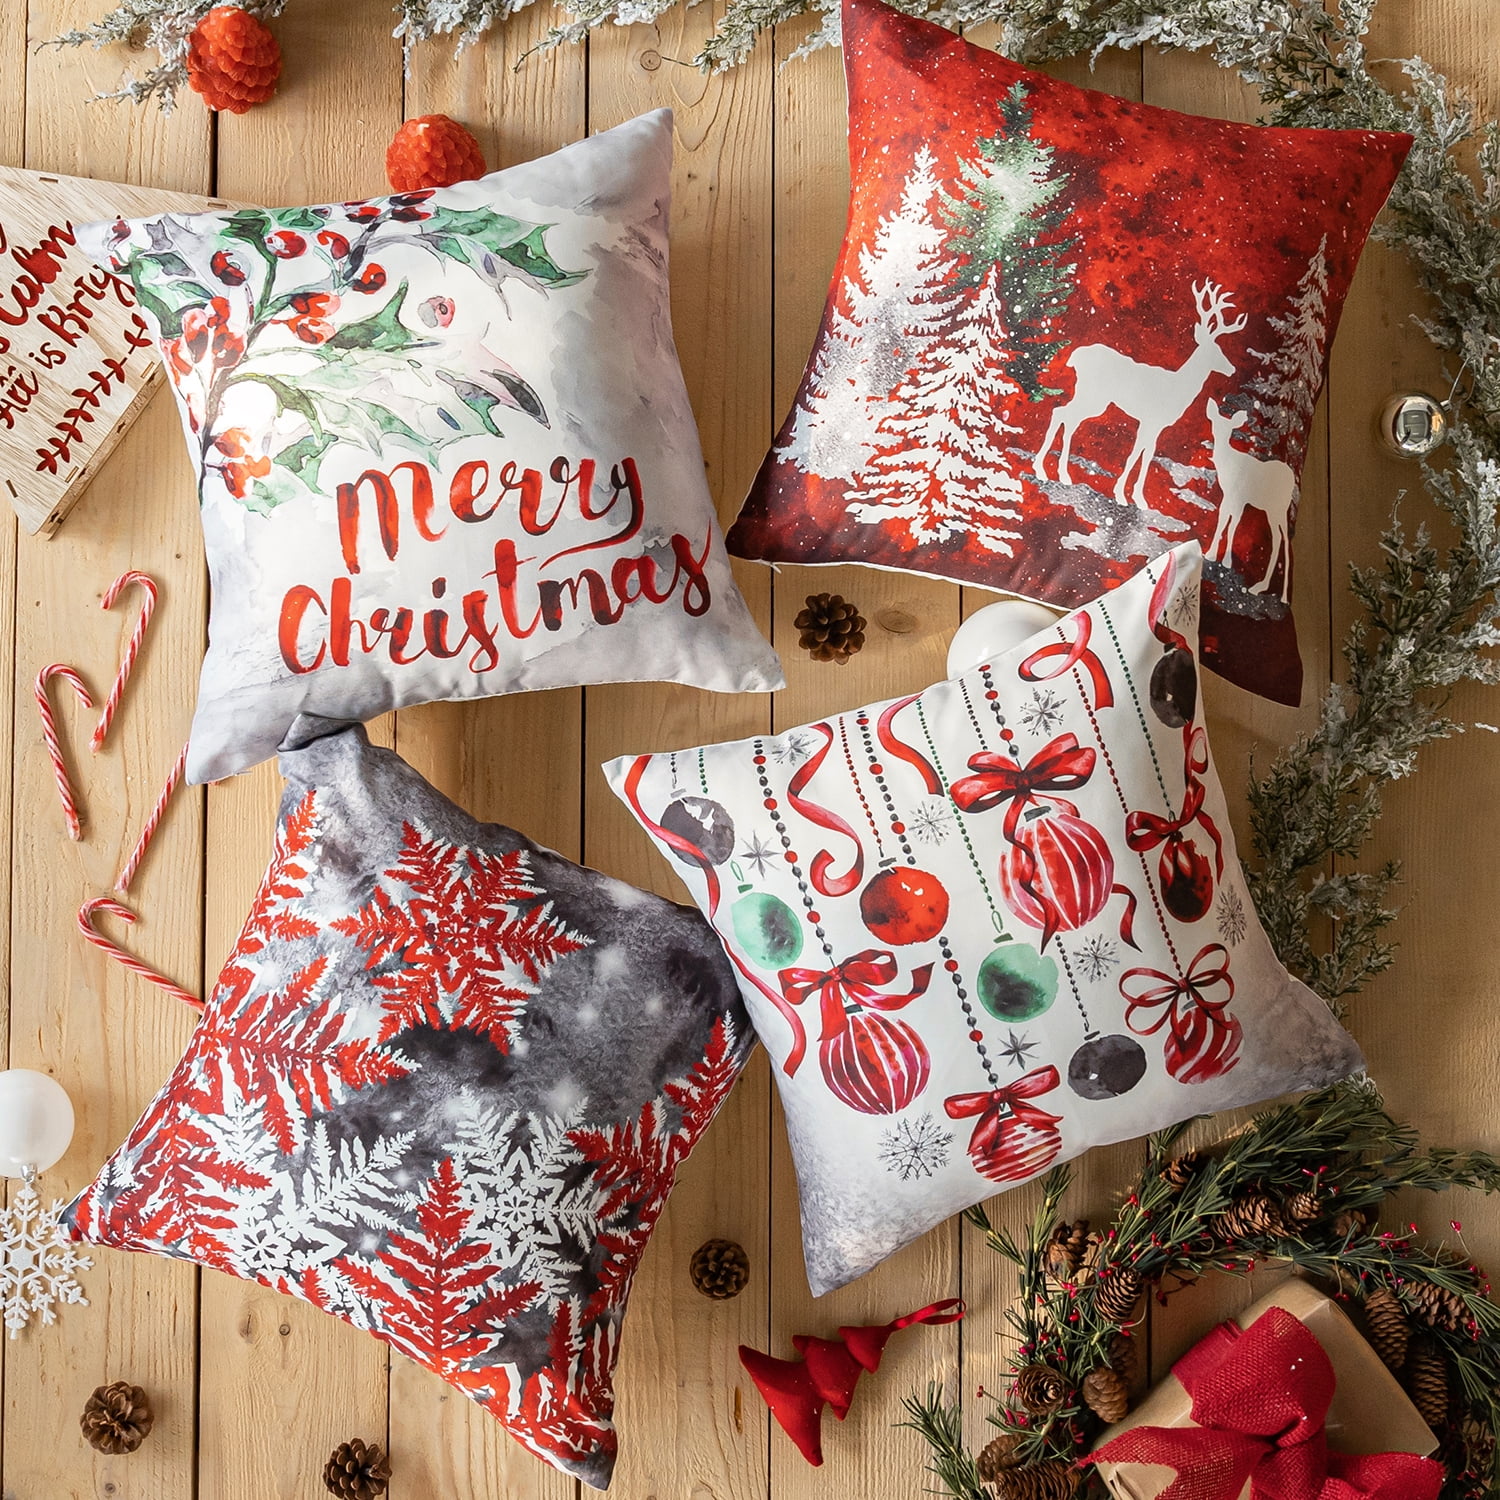 Christmas Applique Embroidery and Pom Pom Decorative Holiday Series Throw  Pillow with inserts, Red and White, 18 x 18, Set of 4 